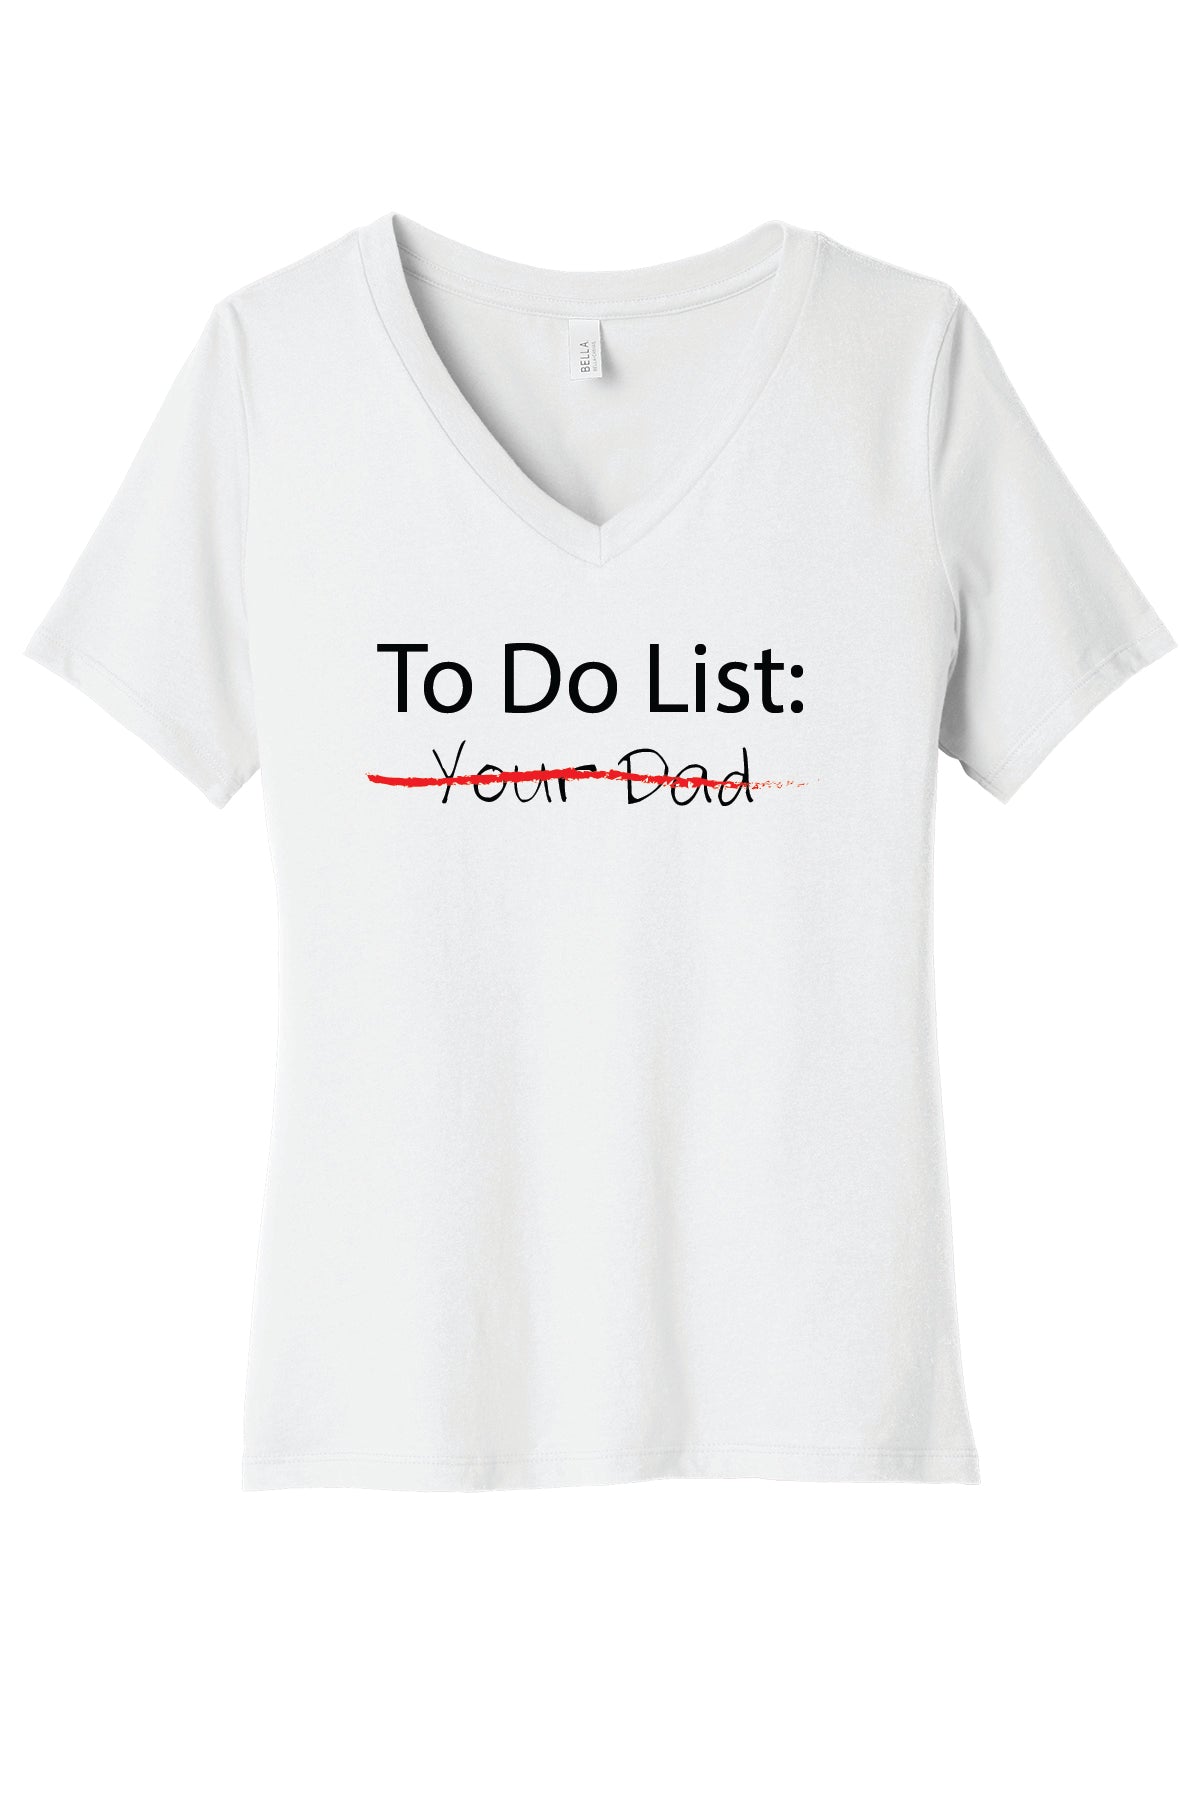 To Do List: Your Dad